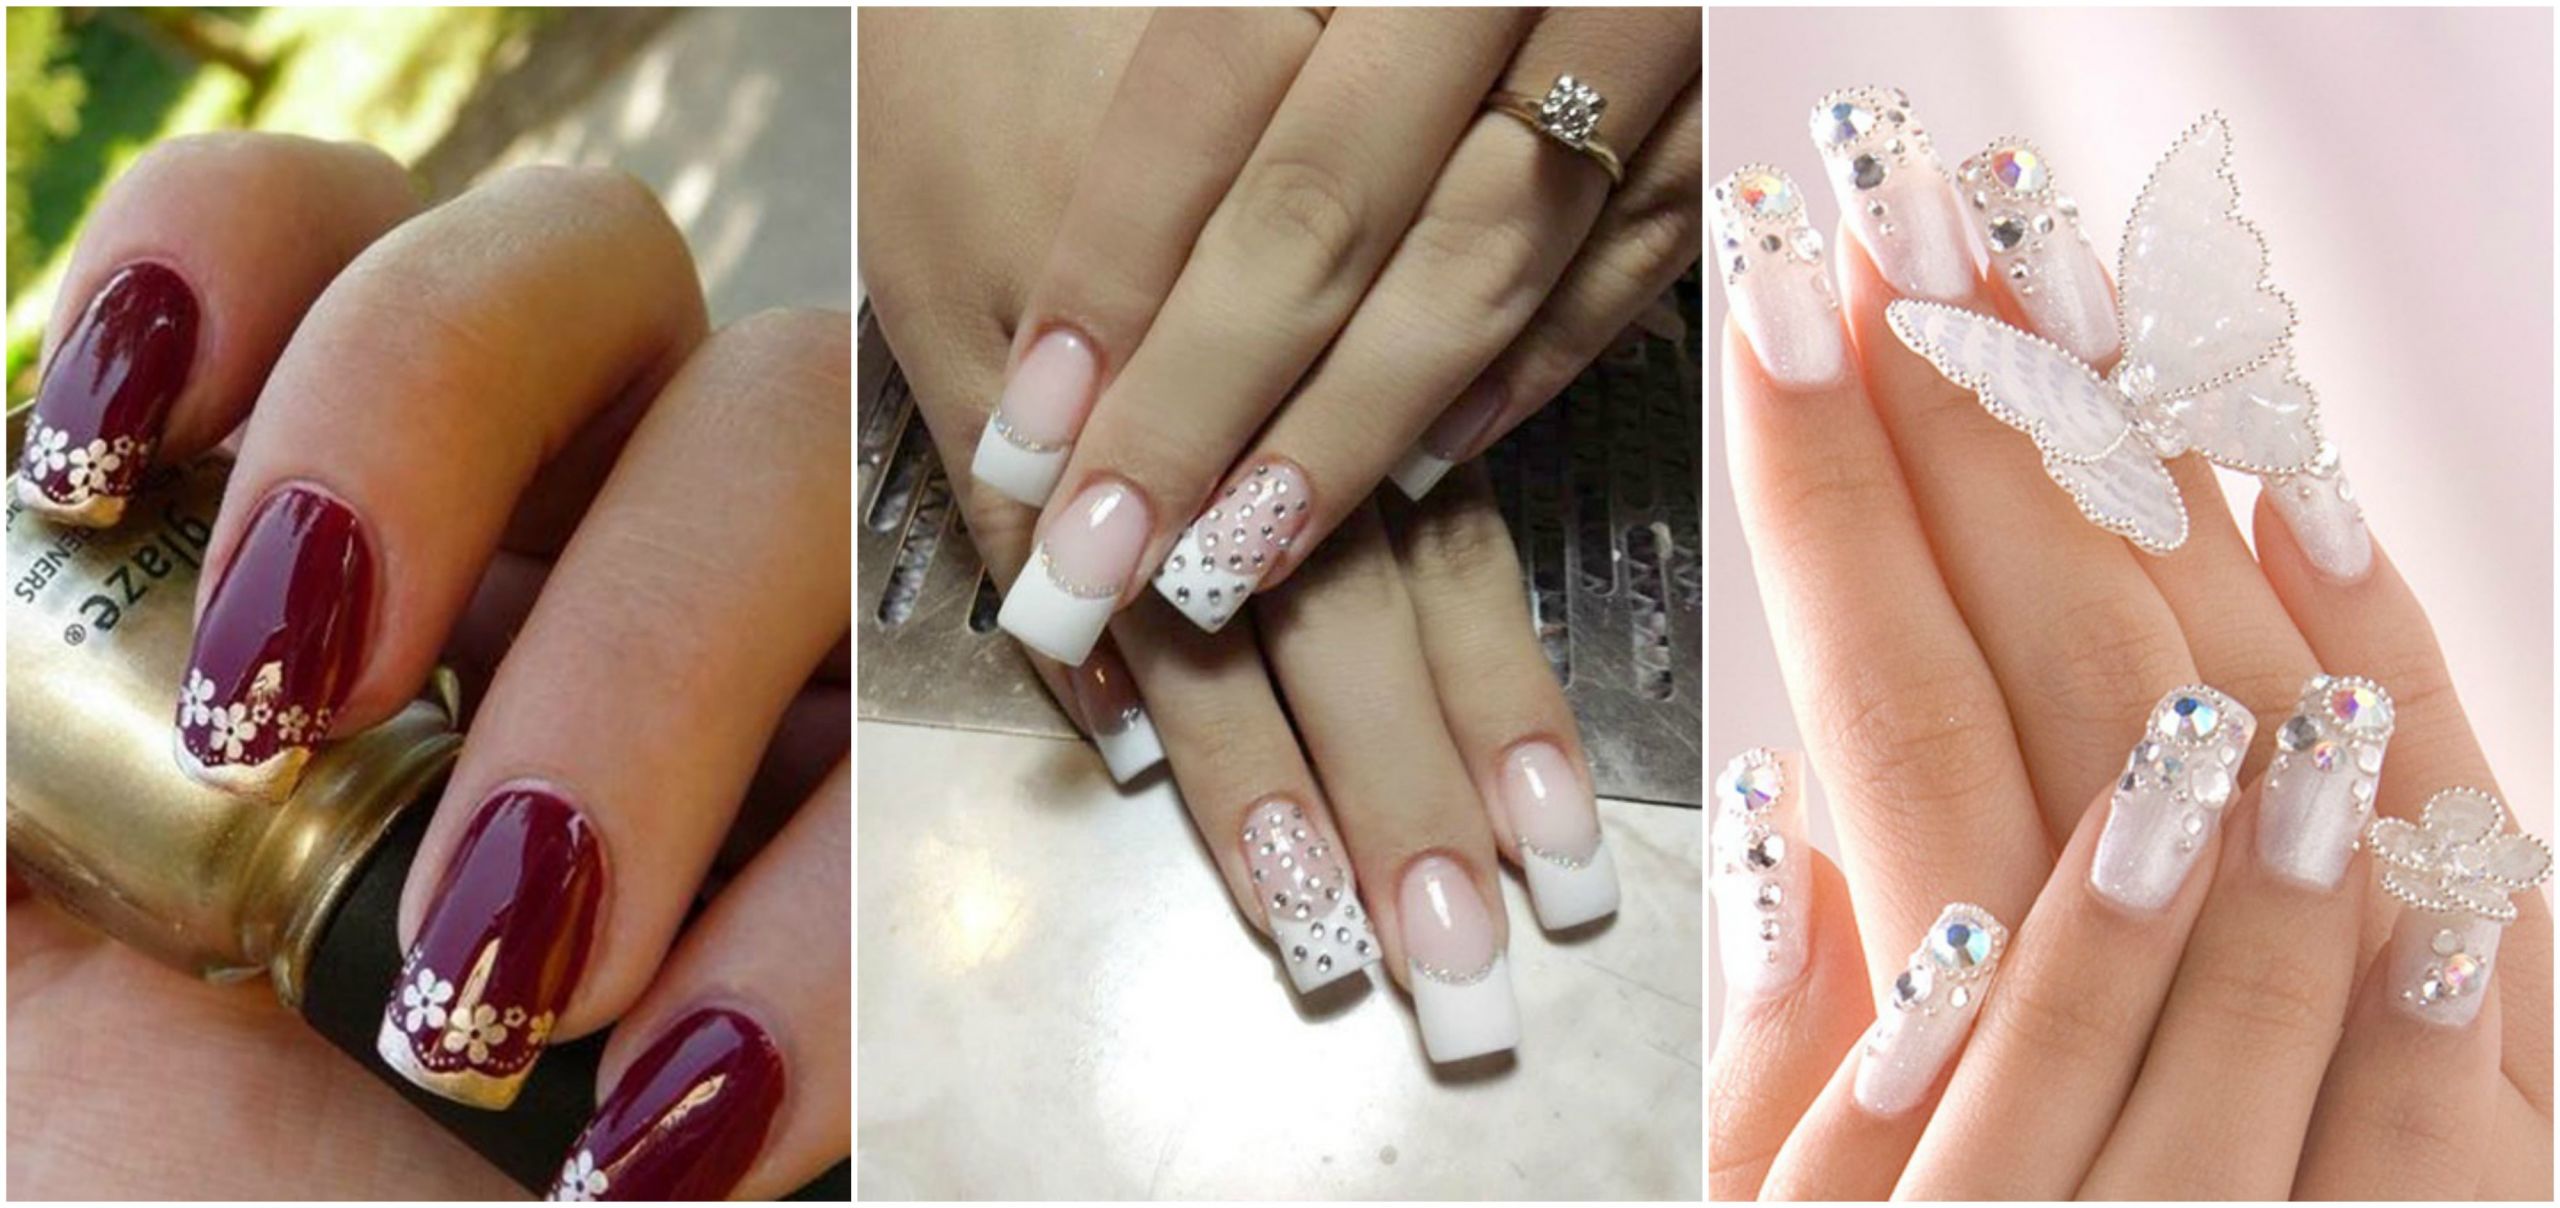 Nail Art For Wedding Day
 Wedding Nail Art Makes You Look Stunning on Your Wedding